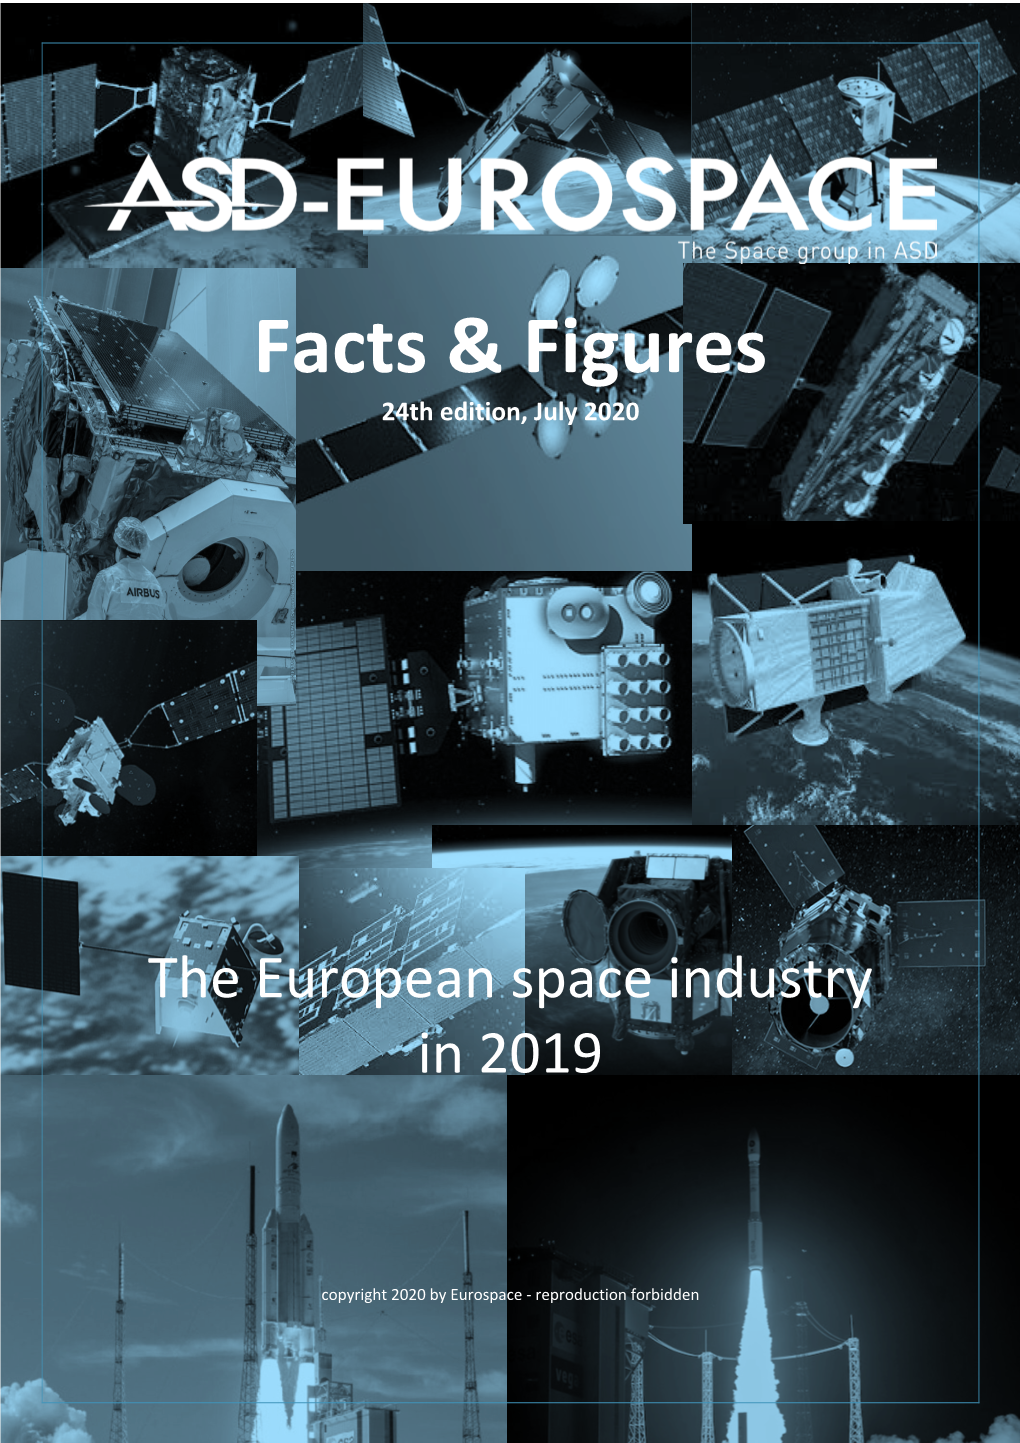 Eurospace Facts & Figures 2020 Edition